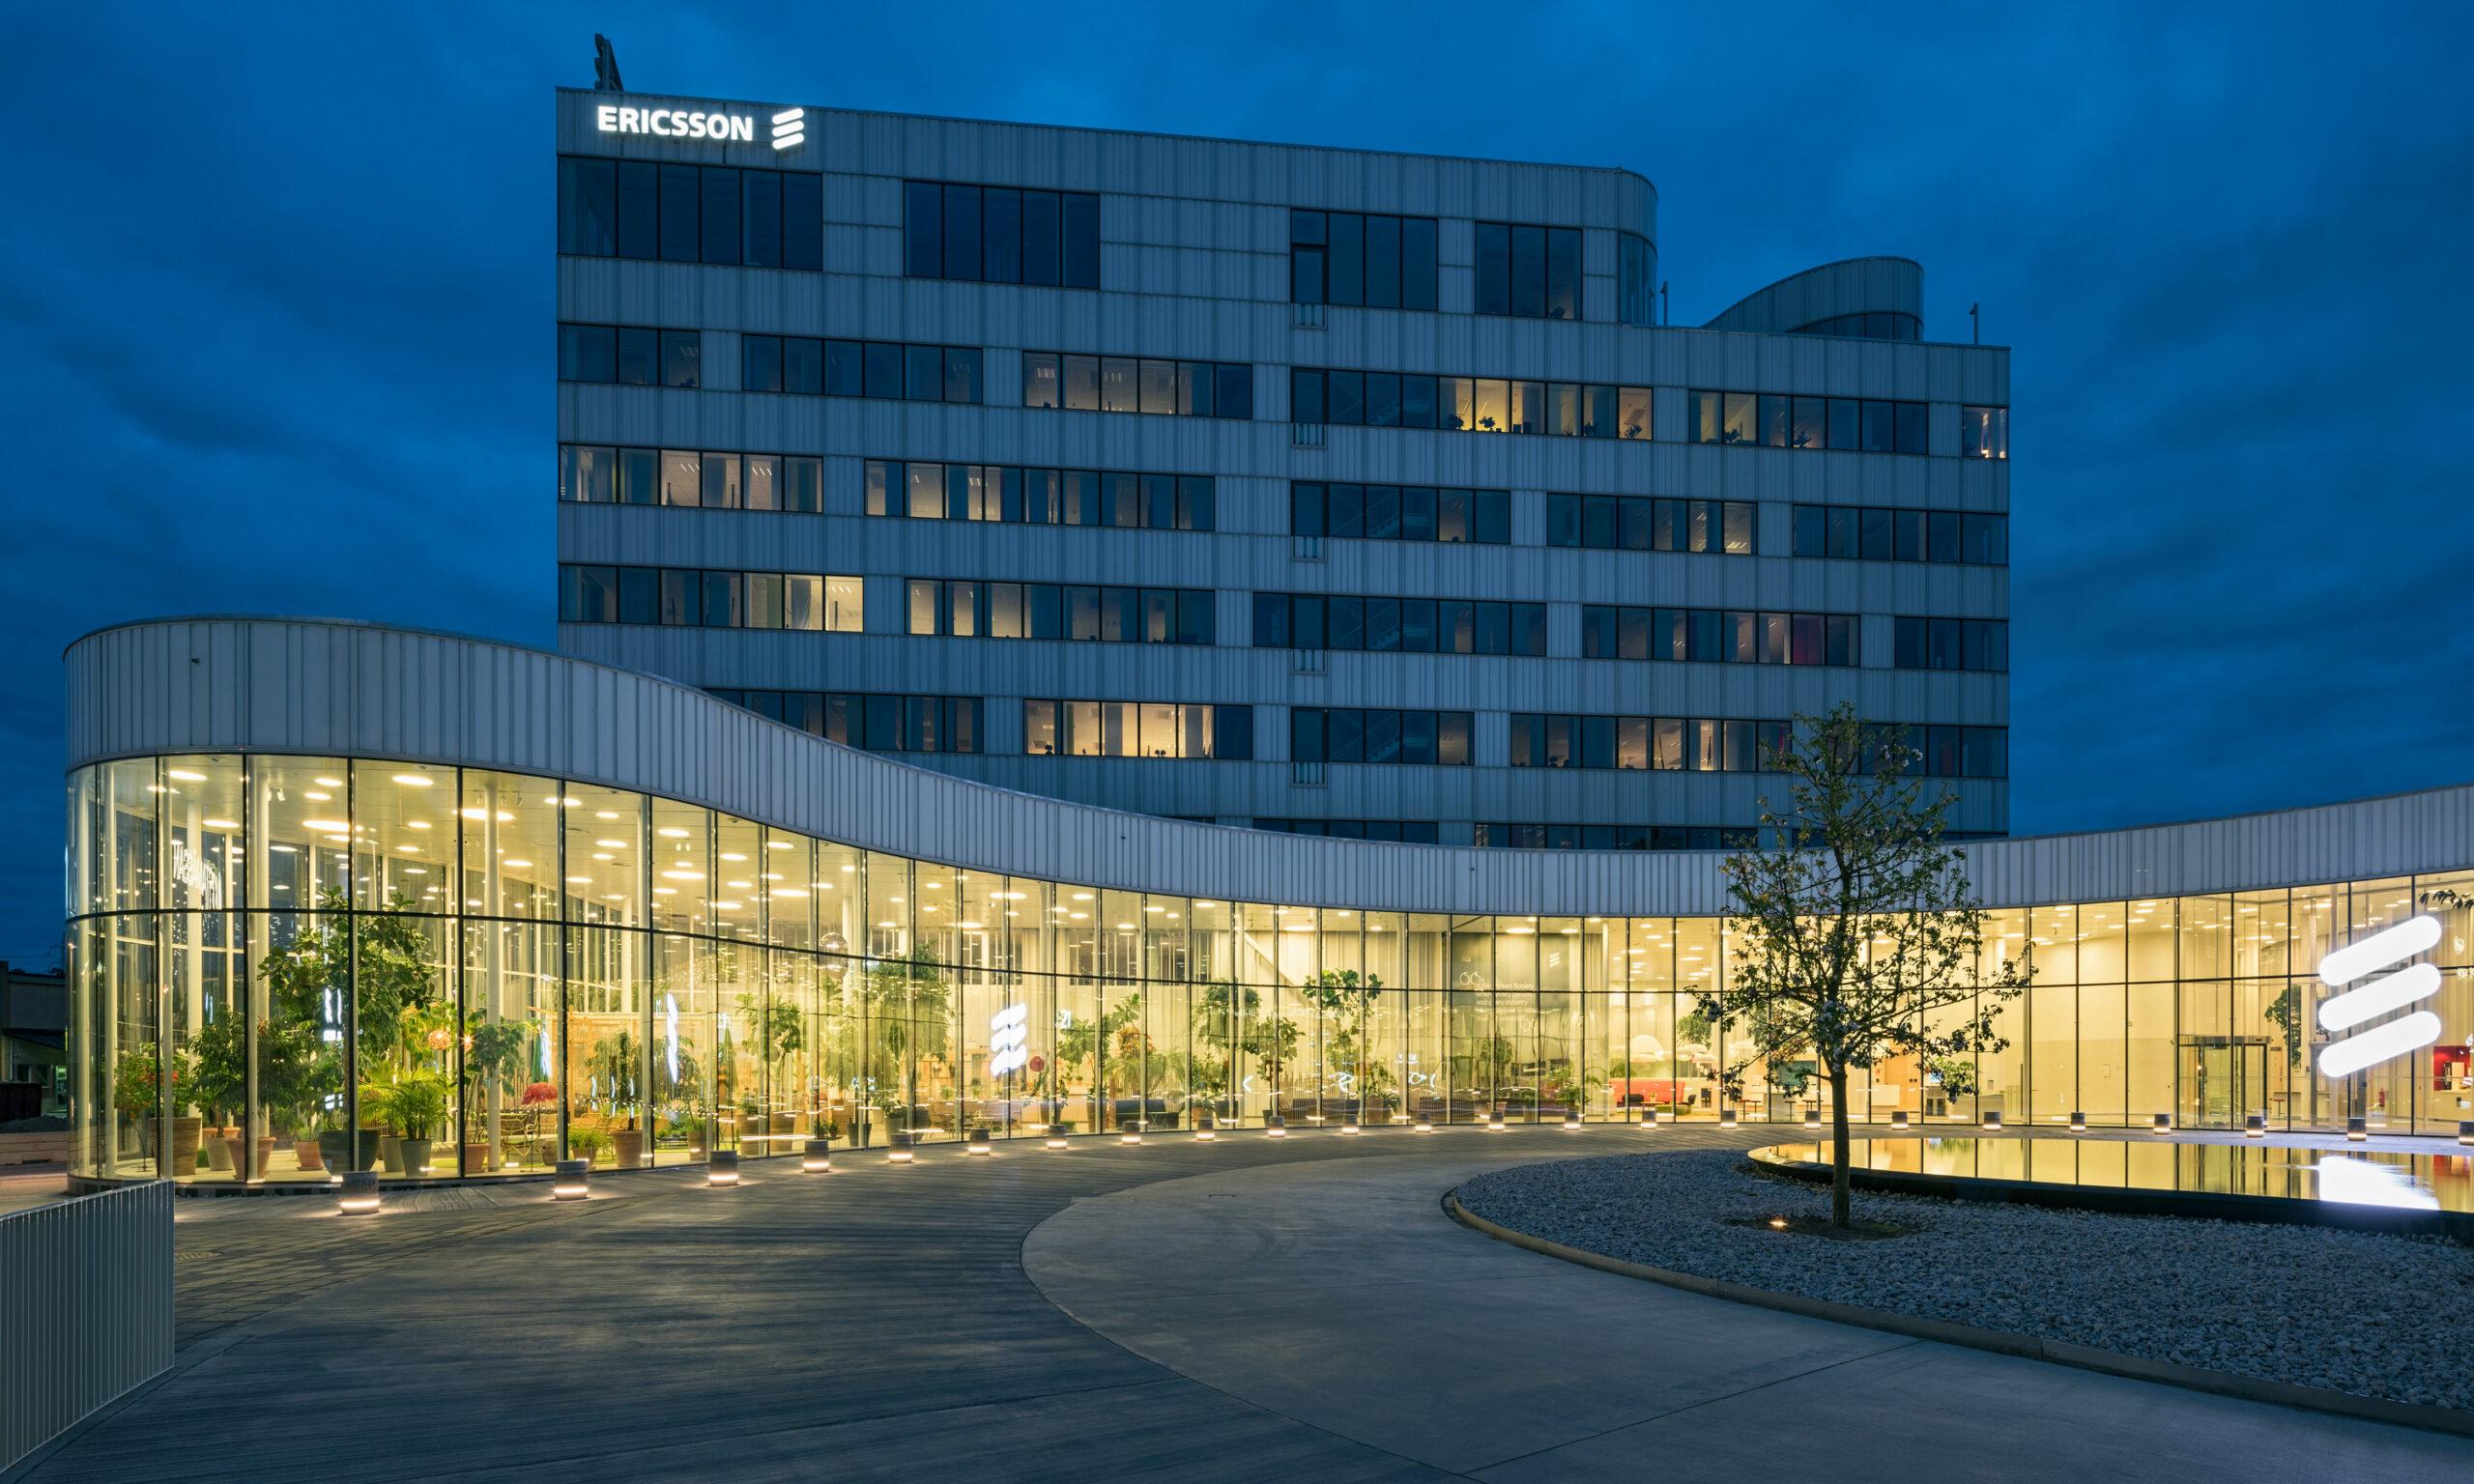 Ericsson's headquarters in Kista seen from the outside.